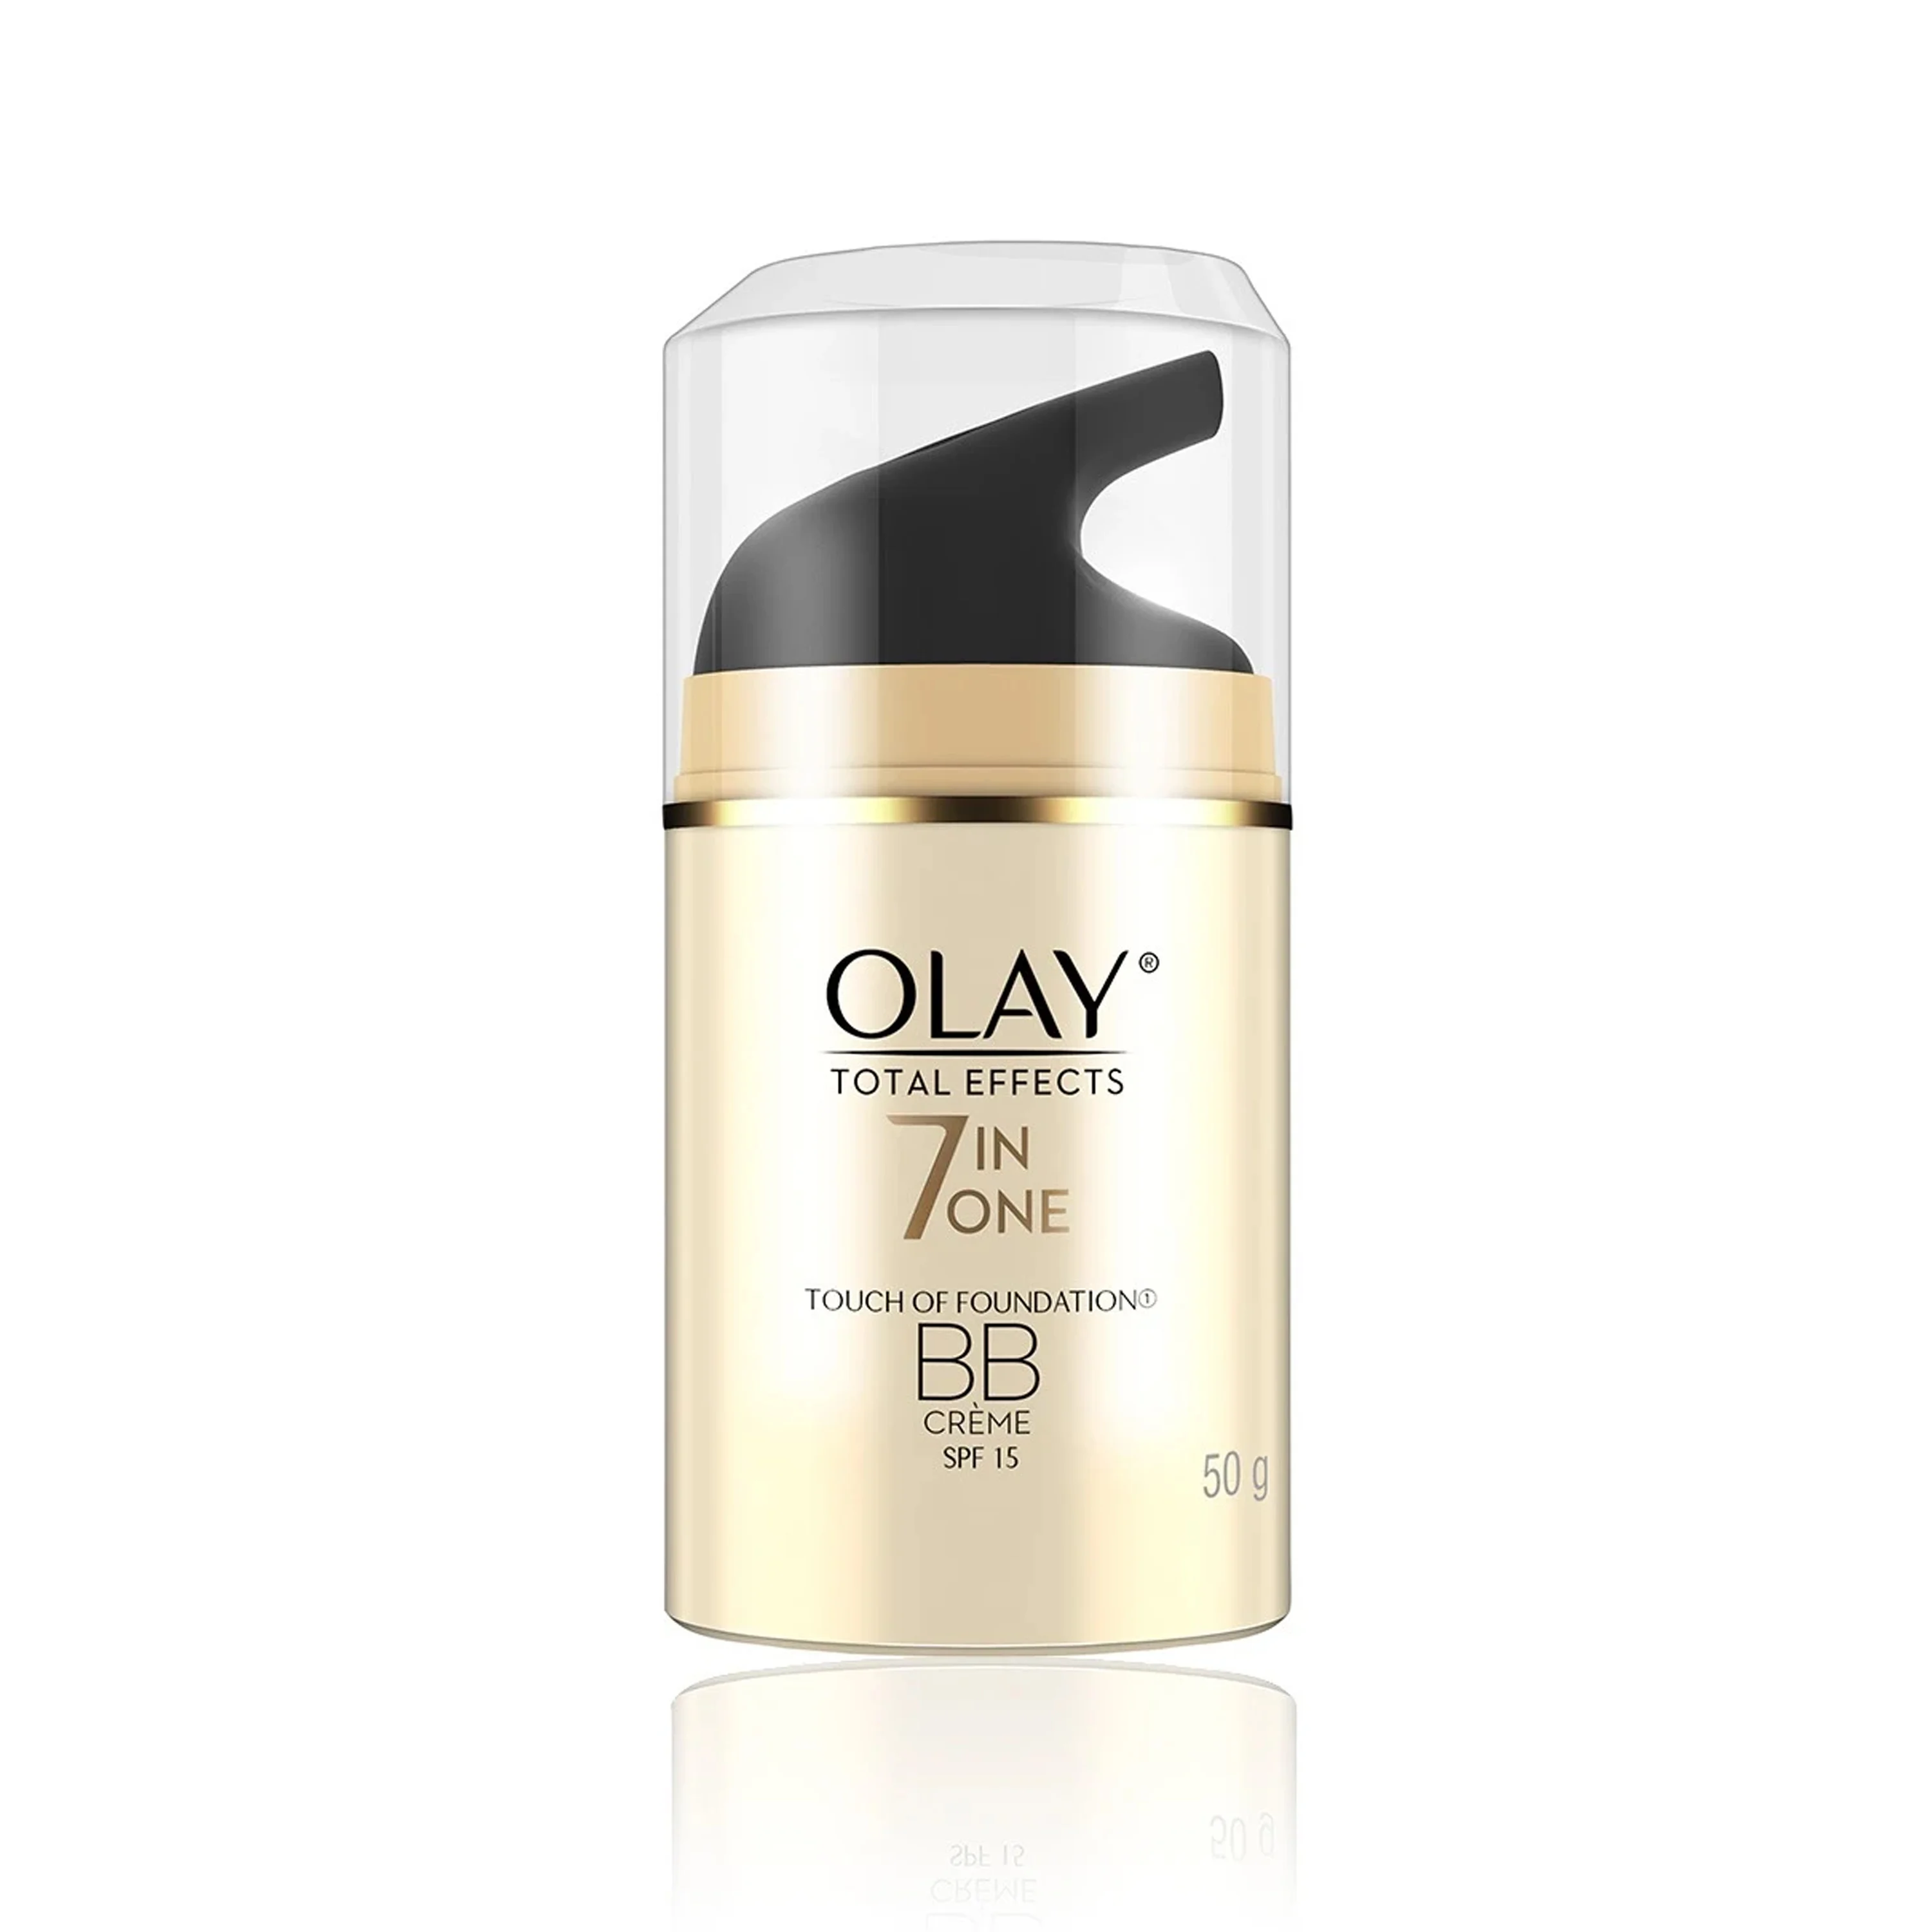 Olay Total Effects BB Crème SPF 15